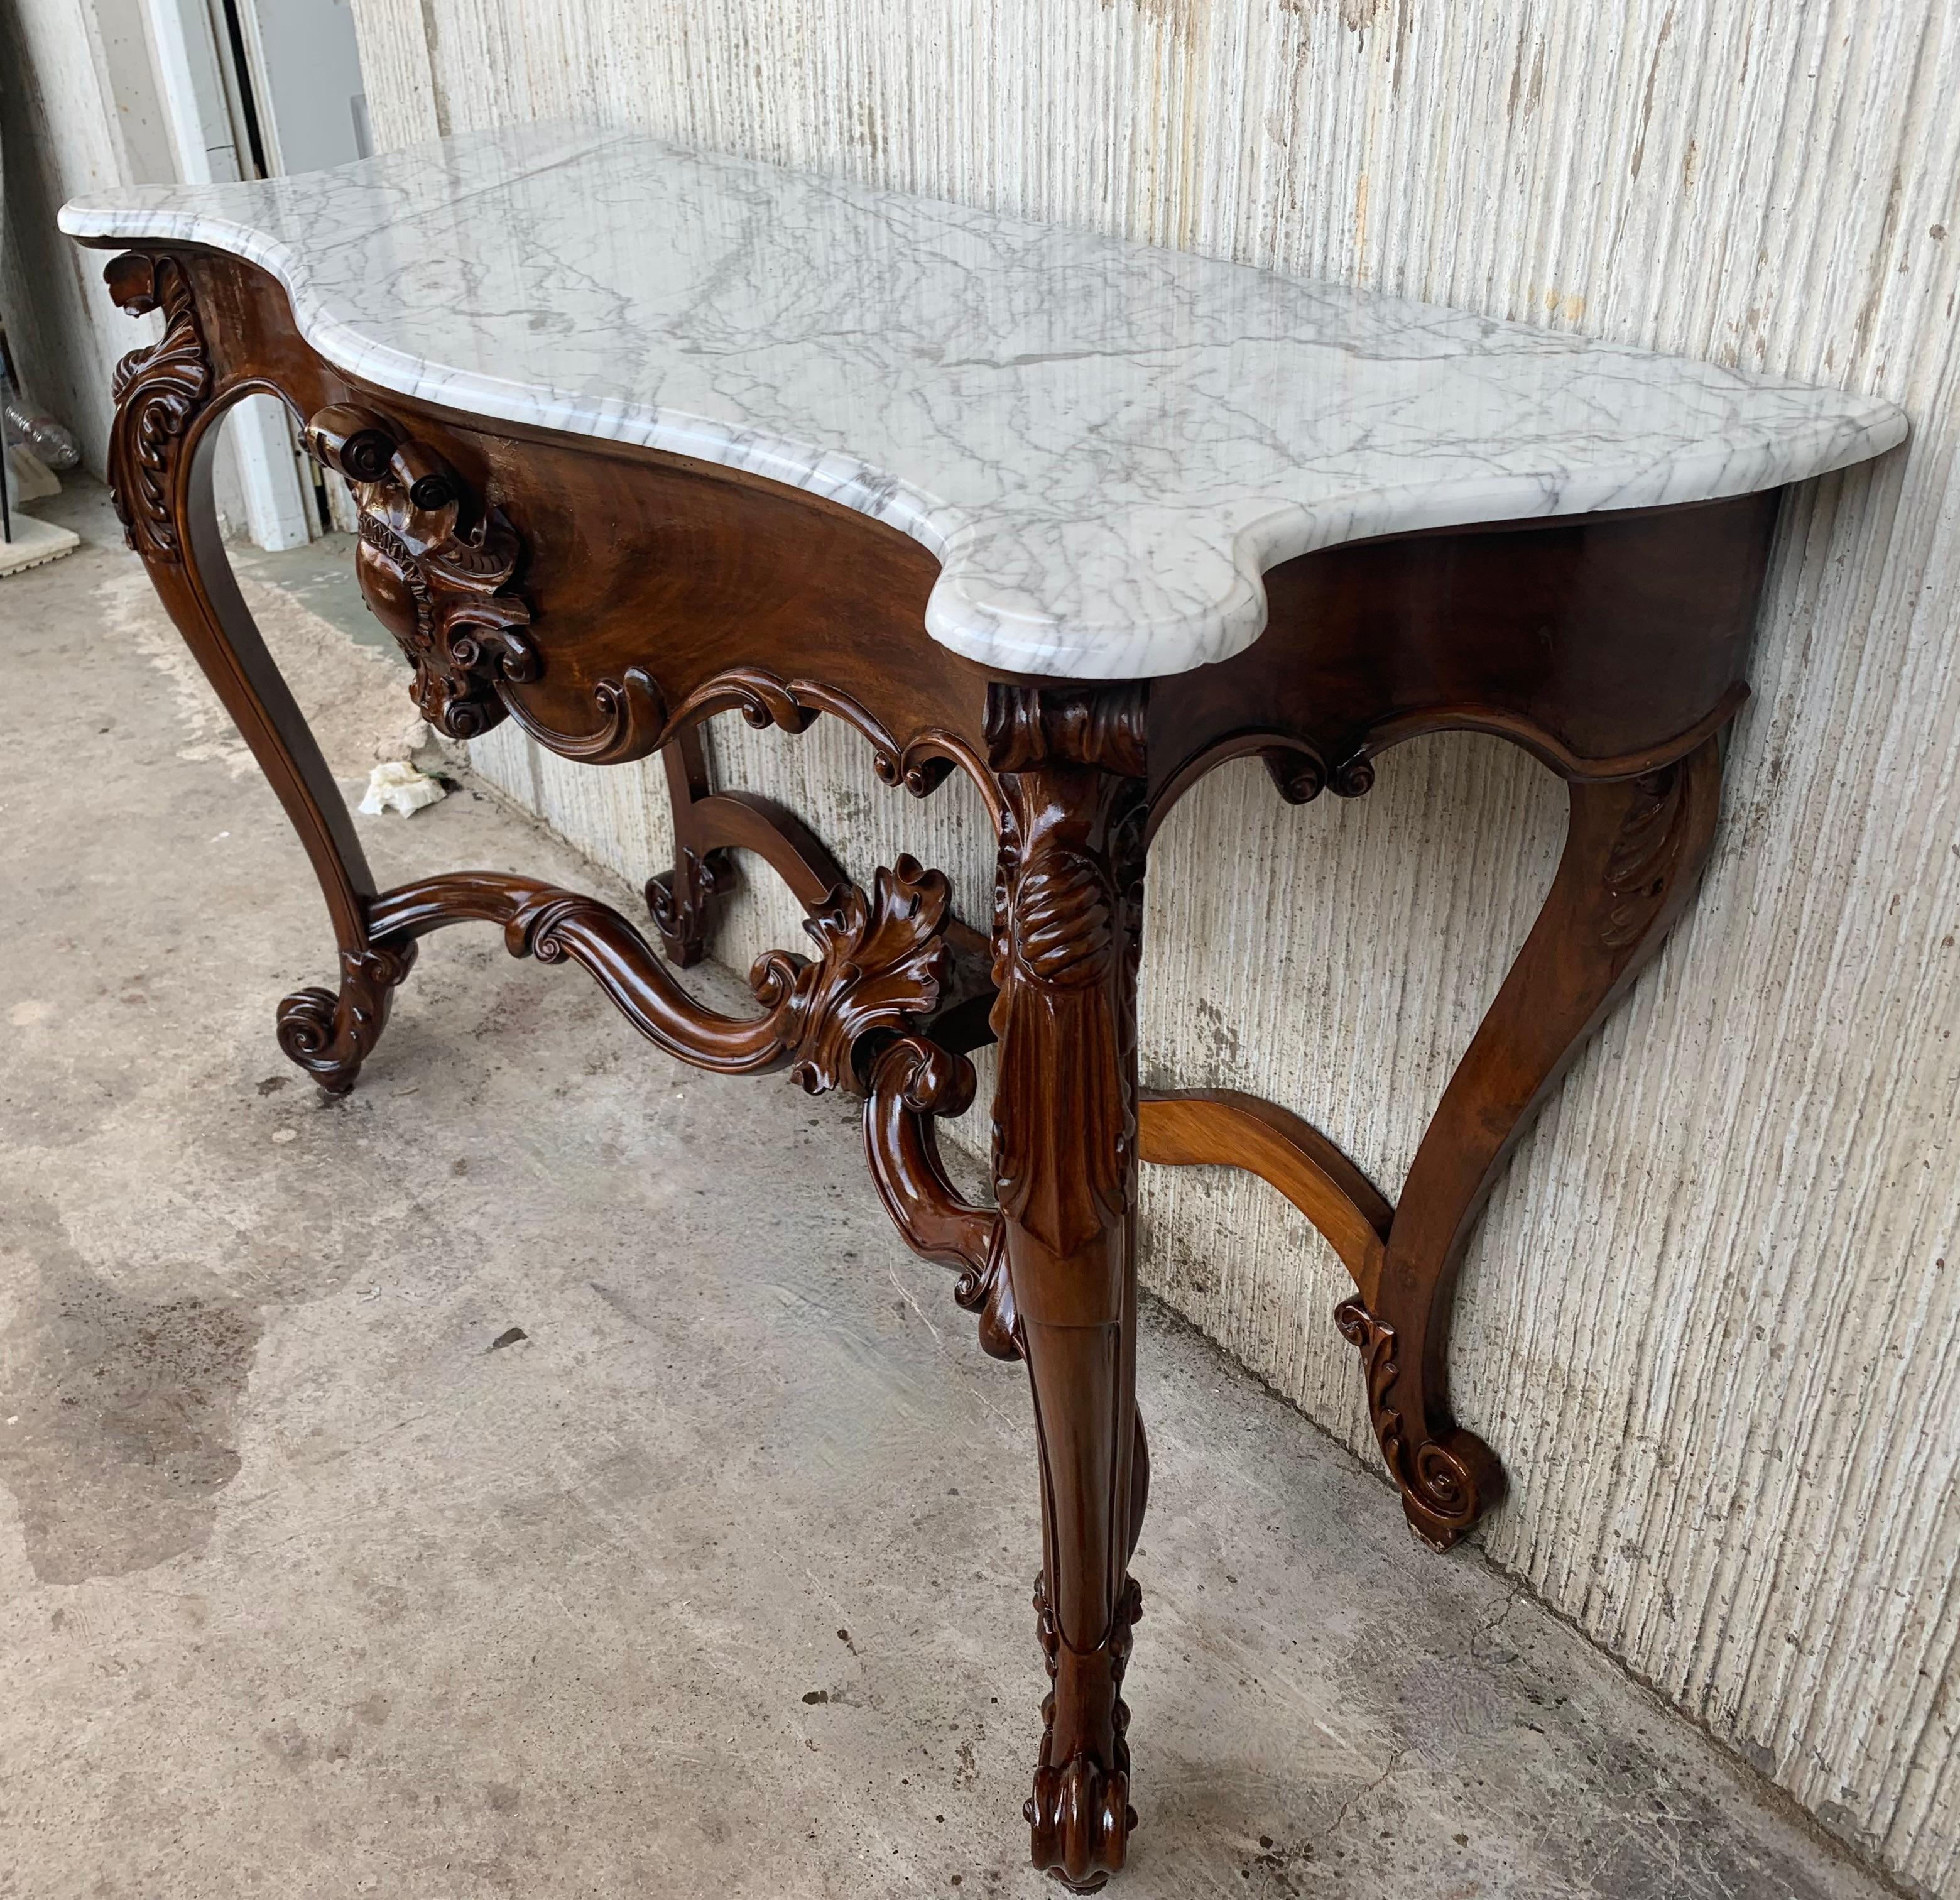 Large French Regency Carved Walnut Console Table with White Marble Top '2 Avai' For Sale 2